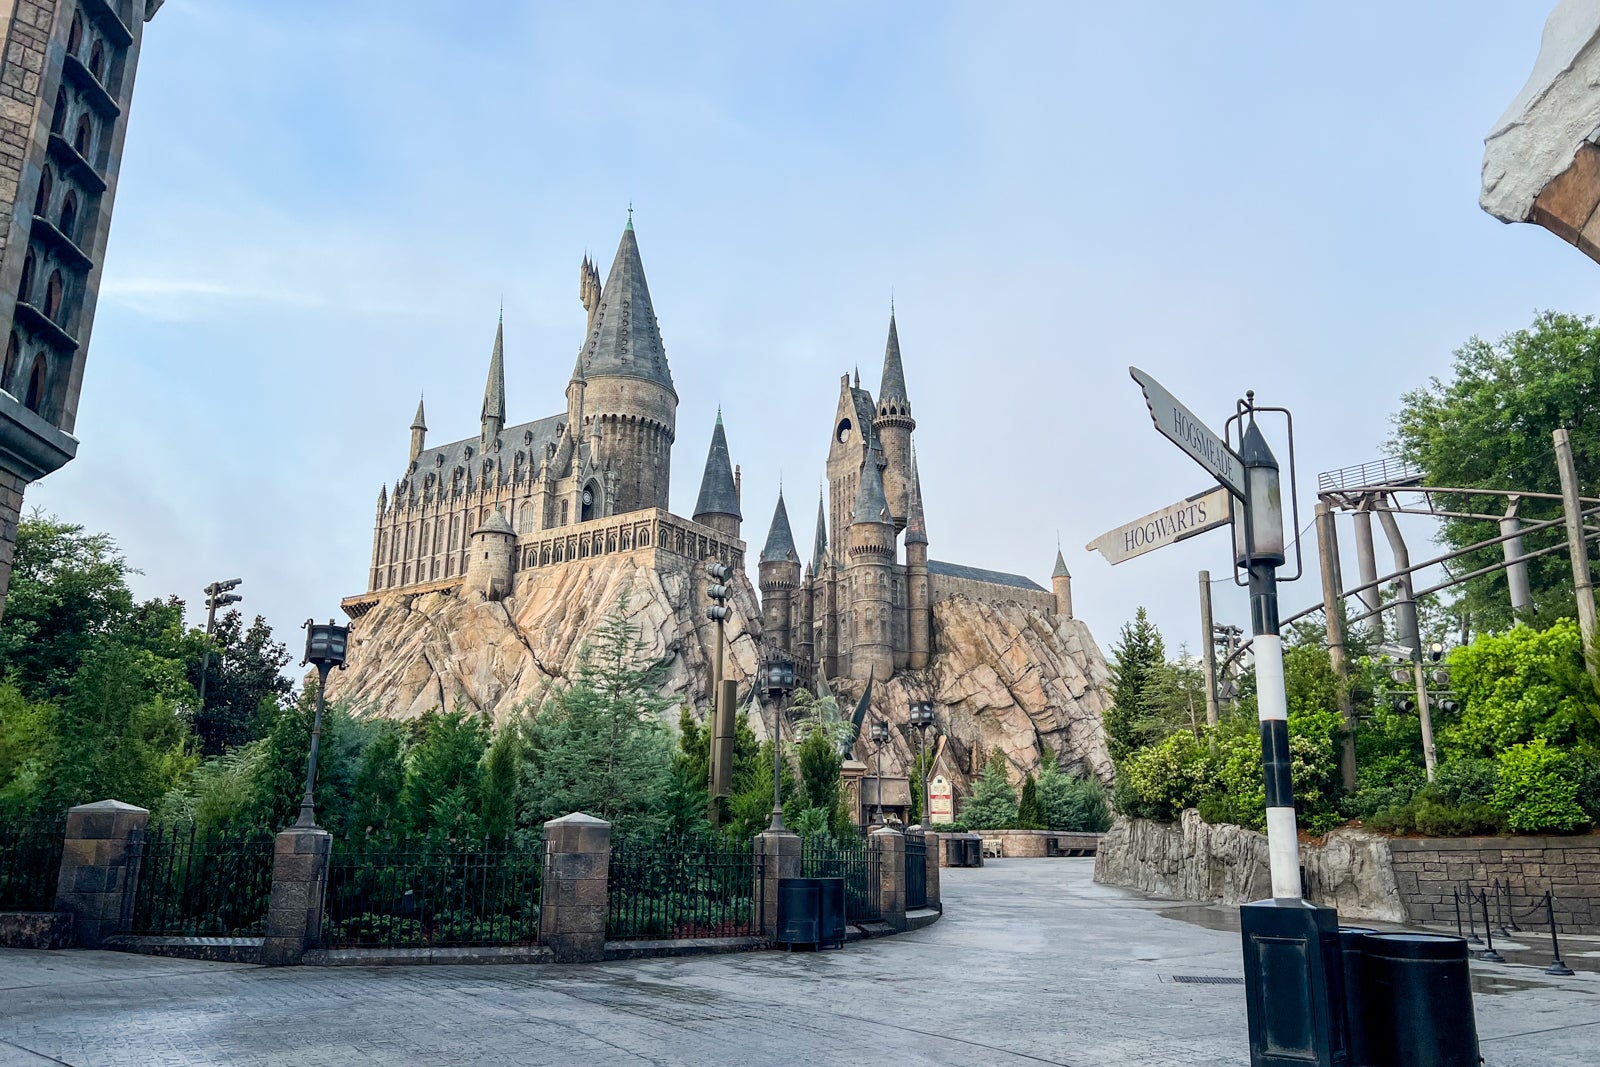 Hogwarts Castle in The Wizarding World of Harry Potter at Universal Orlando Resort